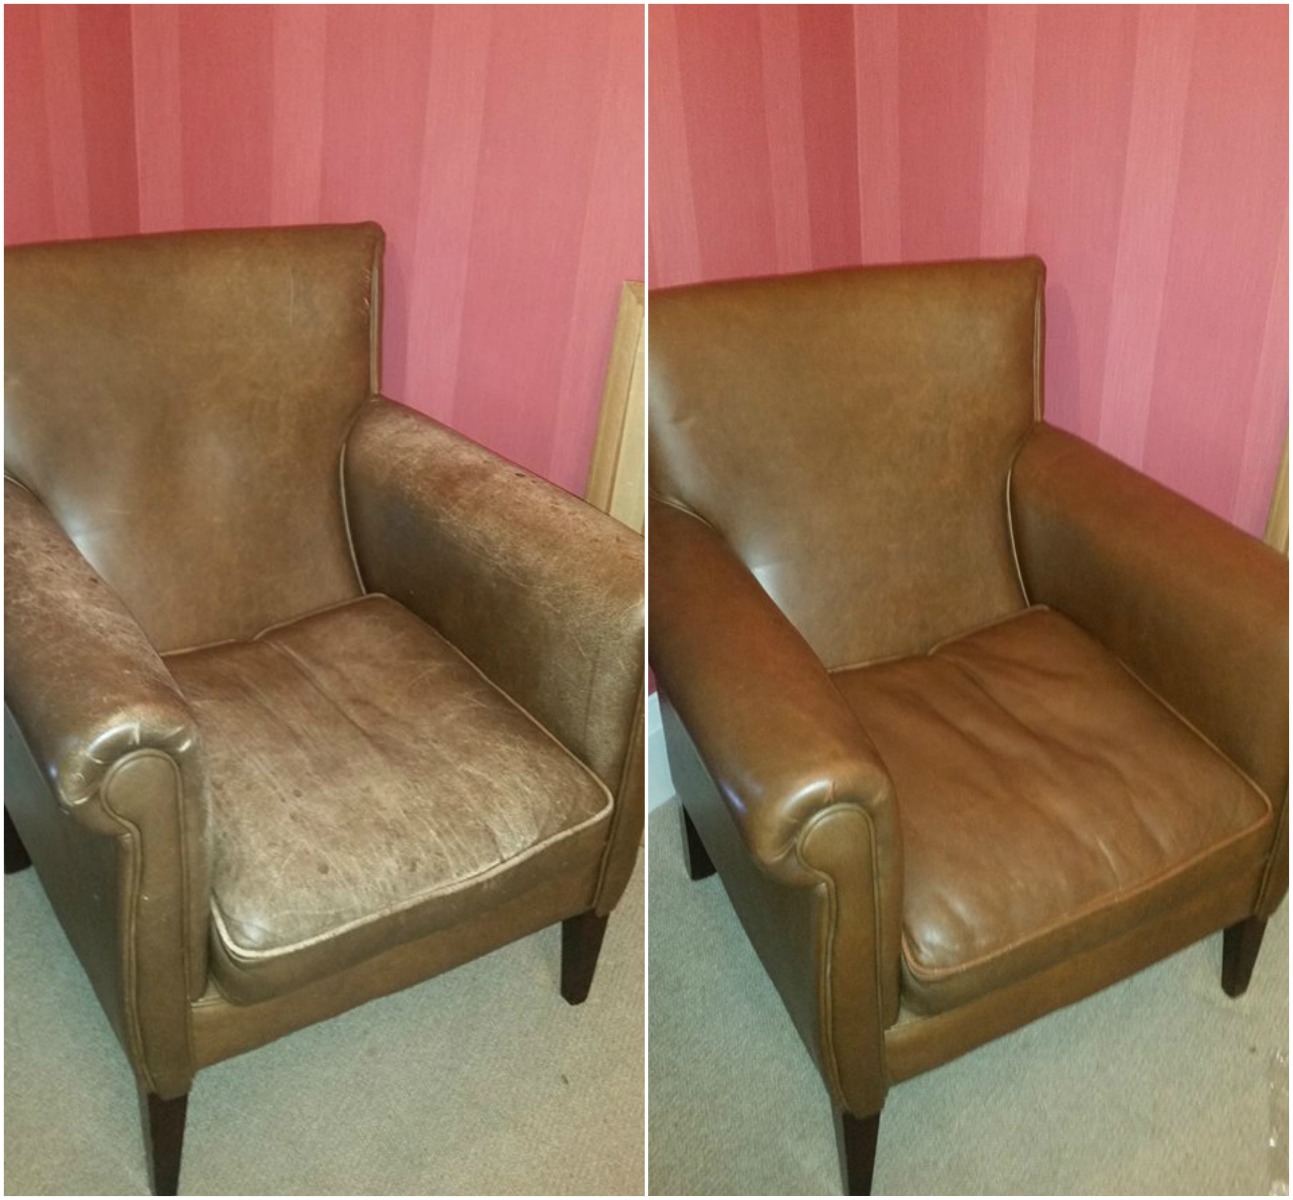 Restoring Colour To A Faded Leather Sofa, Dye Leather Chair